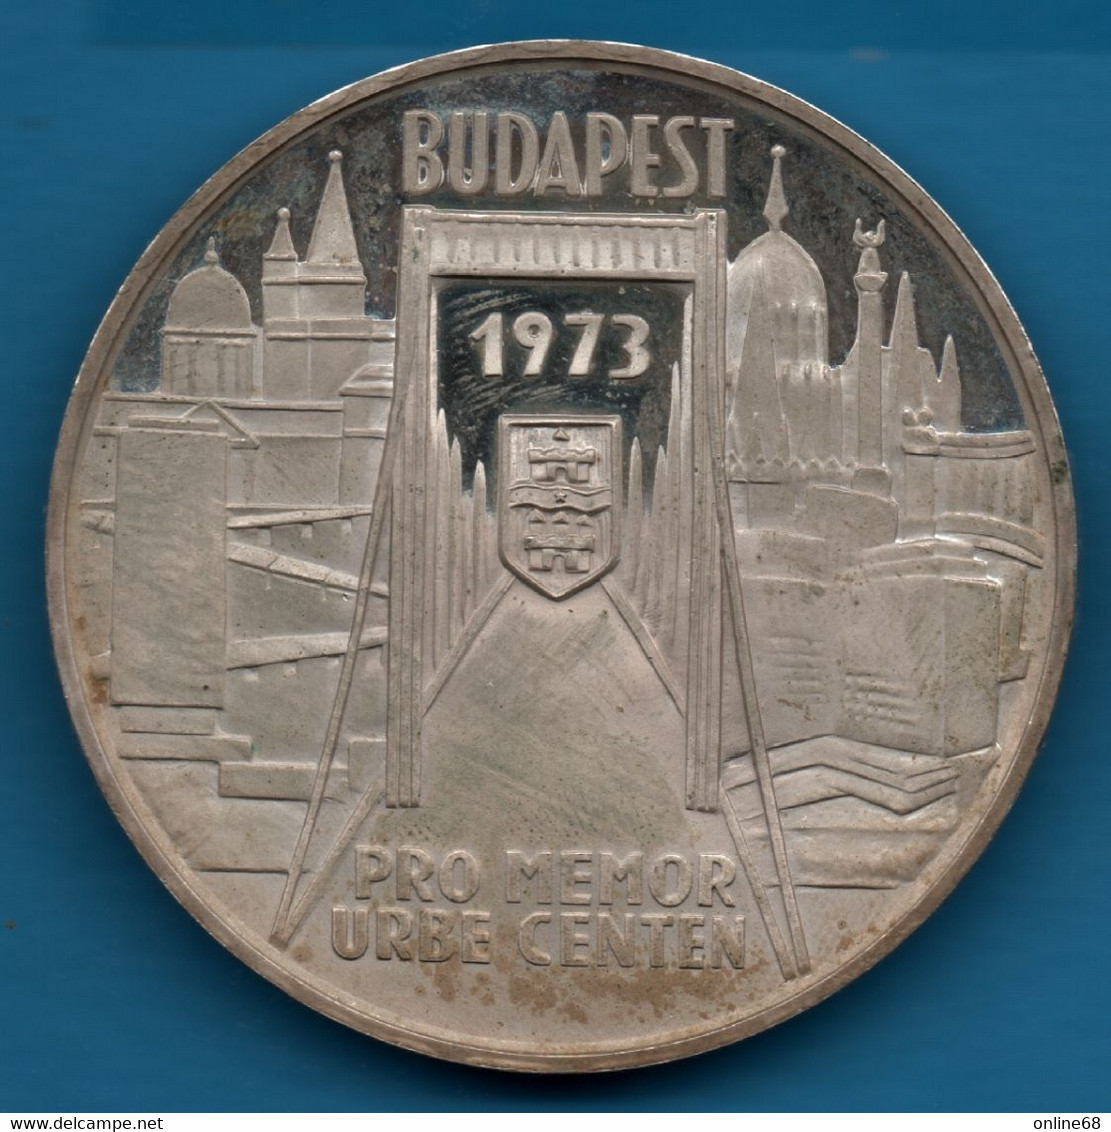 HUNGARY BUDAPEST 1873-1973 PRO MEMOR URBE CENTEN  Argent 835‰ Silver Cities Of Pest, Buda, Obuda Merged Into One - Professionals / Firms